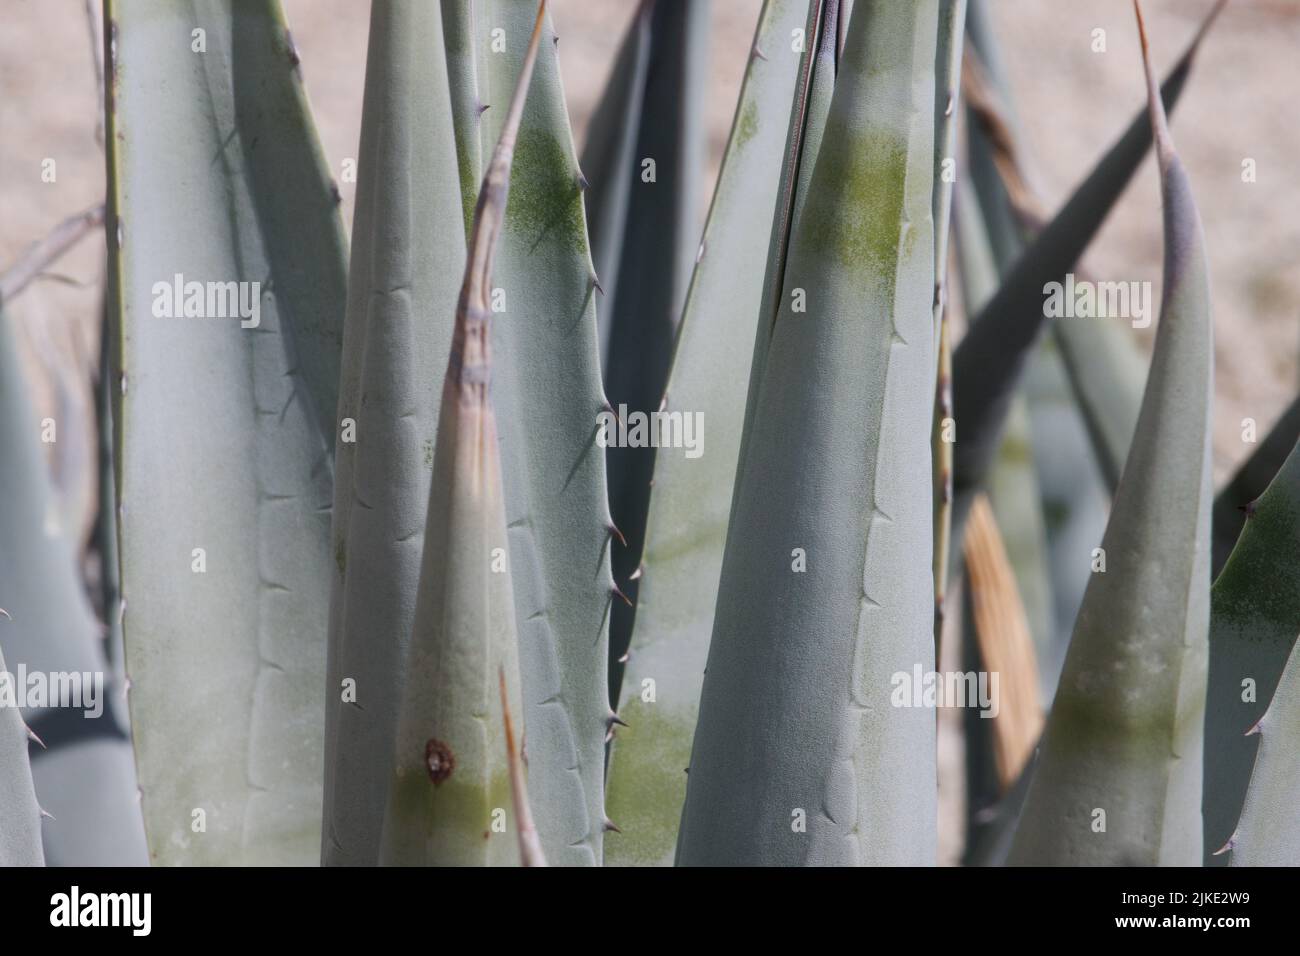 Gray rosetted incurved aculeately margined glabrous lanceolate leaves of Agave Deserti, Asparagaceae, native in the Anza Borrego Desert, Springtime. Stock Photo